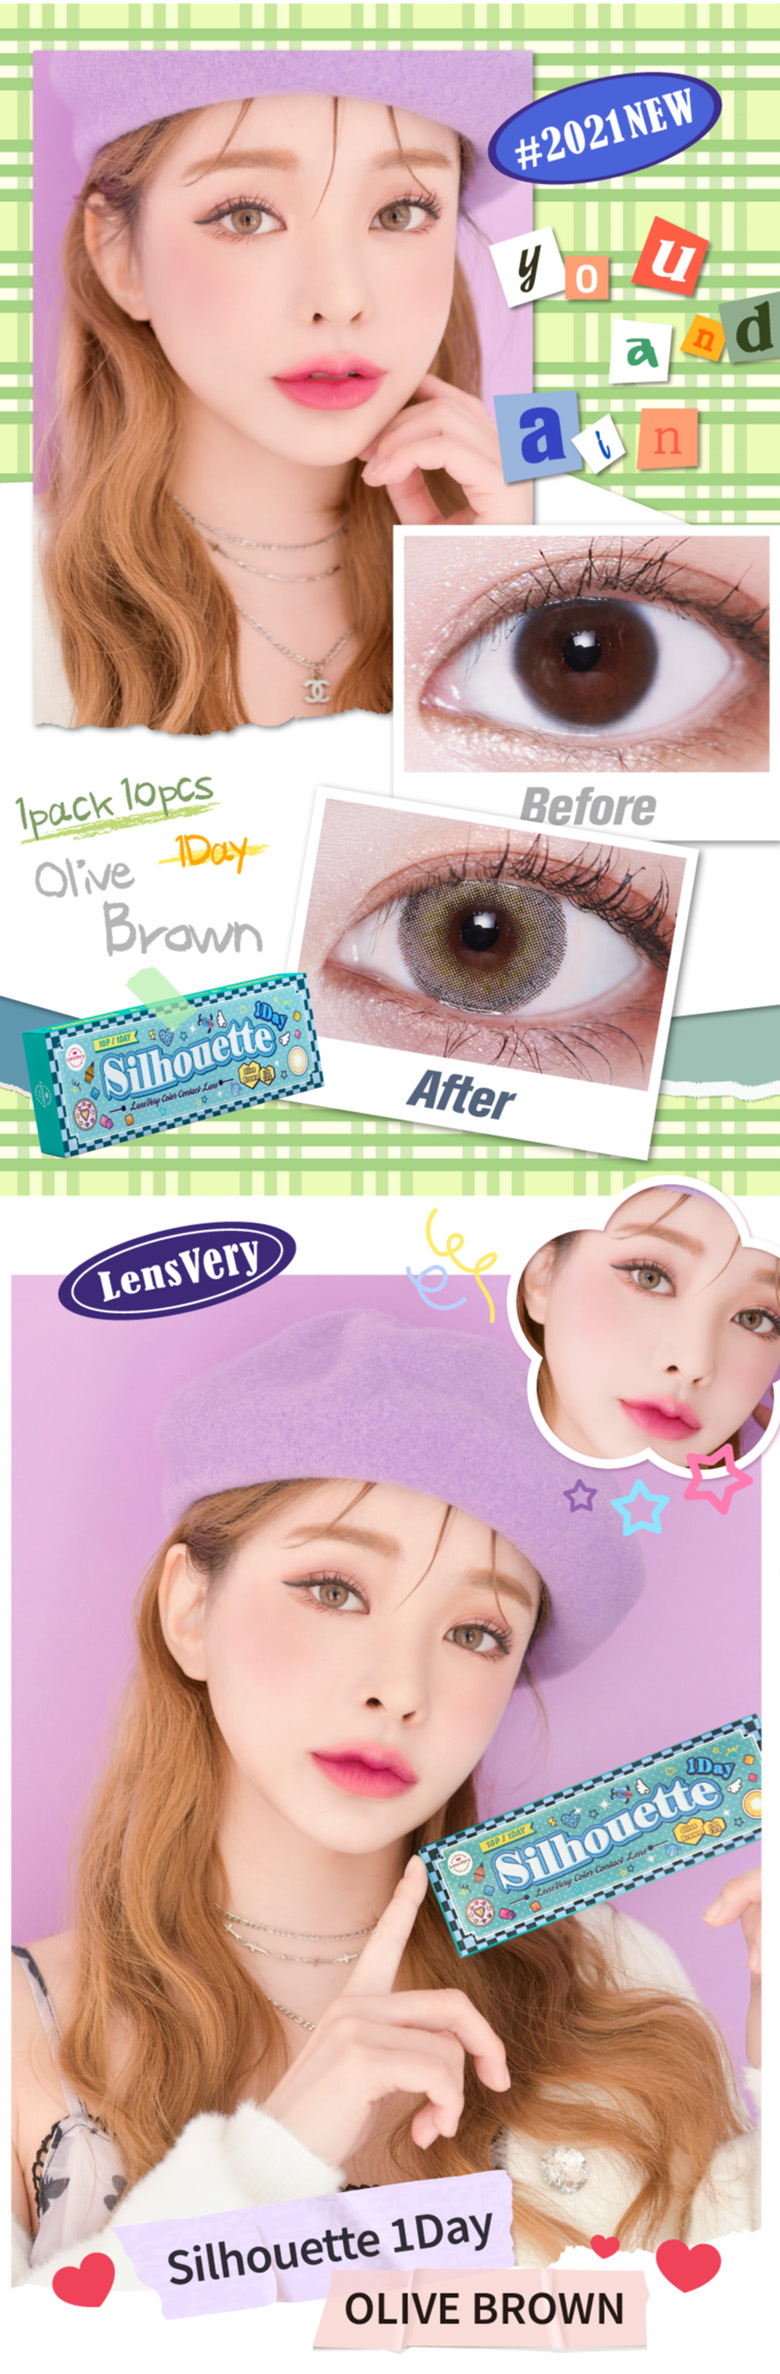 [1 Day/ブラウン/BROWN] シルエット ワンデー - Silhouette - 1 Day (10pcs) [14.0mm]